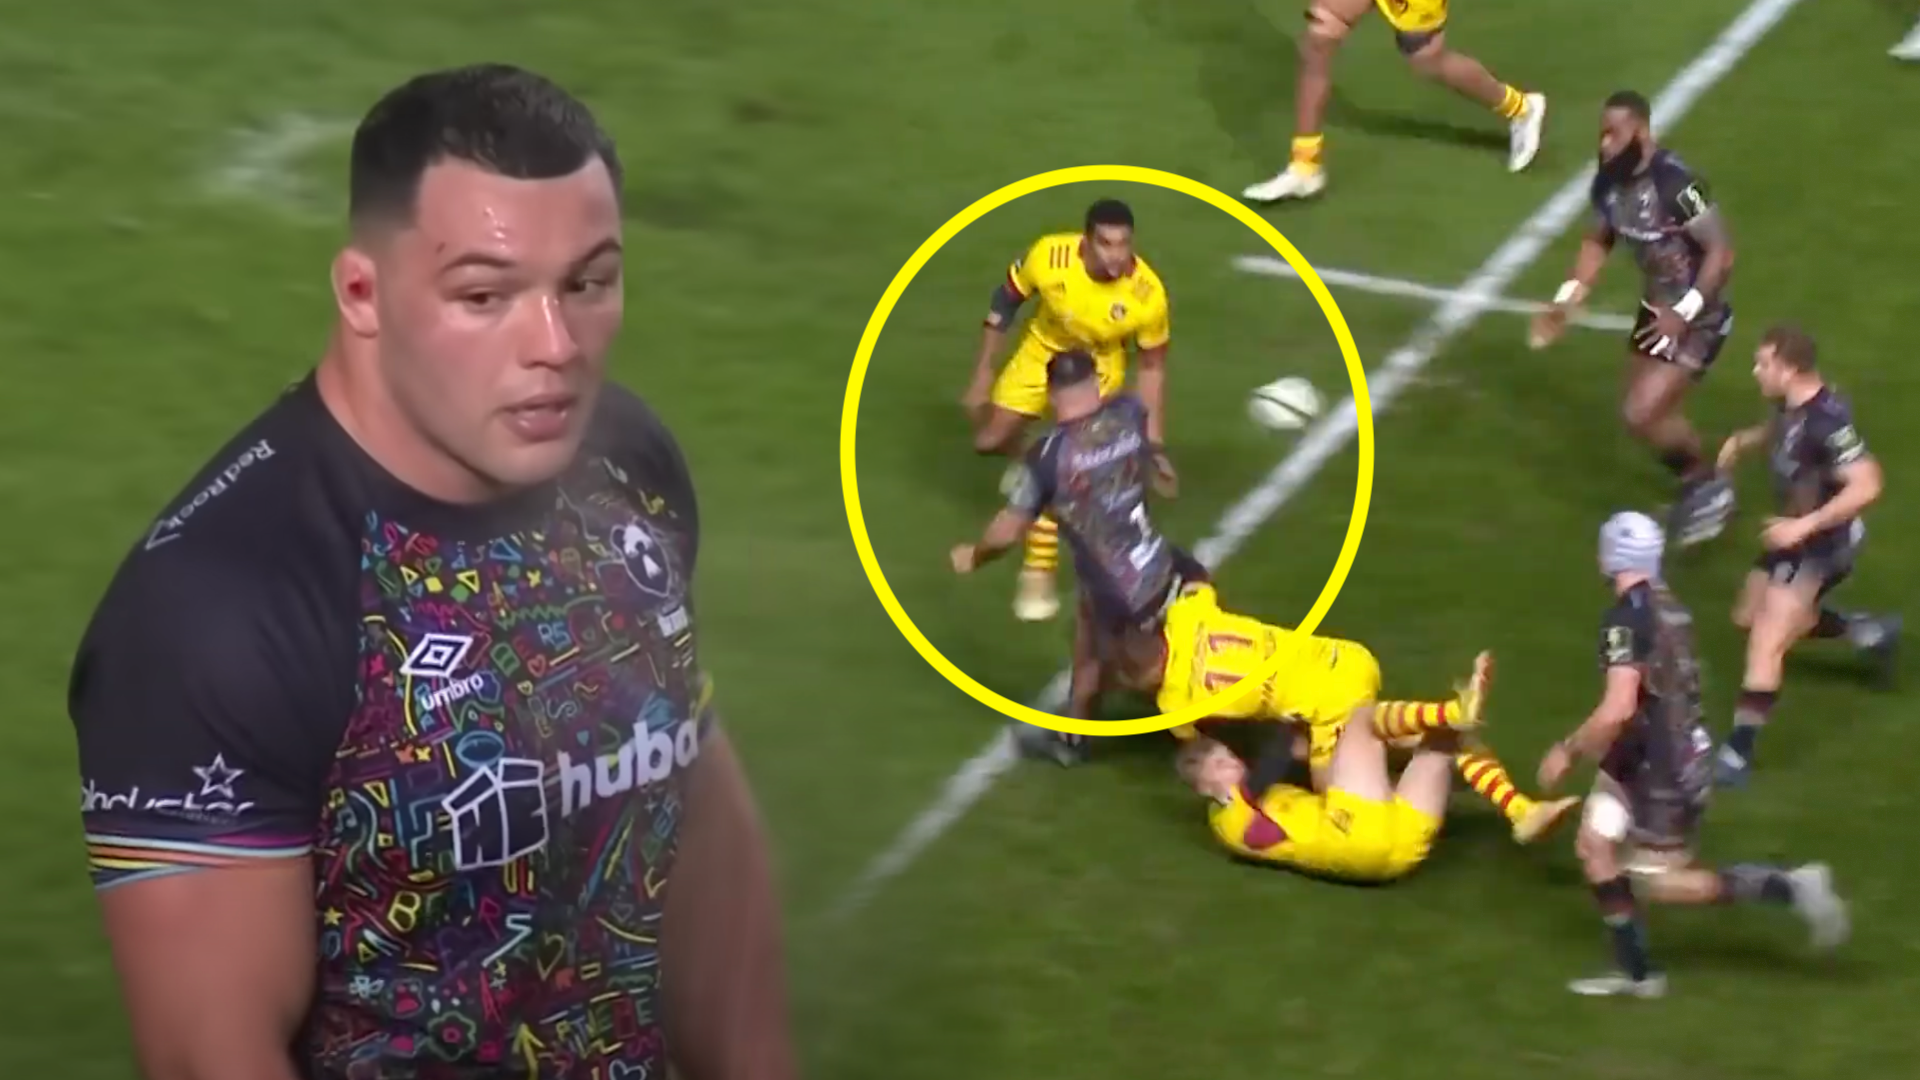 Ellis Genge and Semi Radradra combining is game over for defences